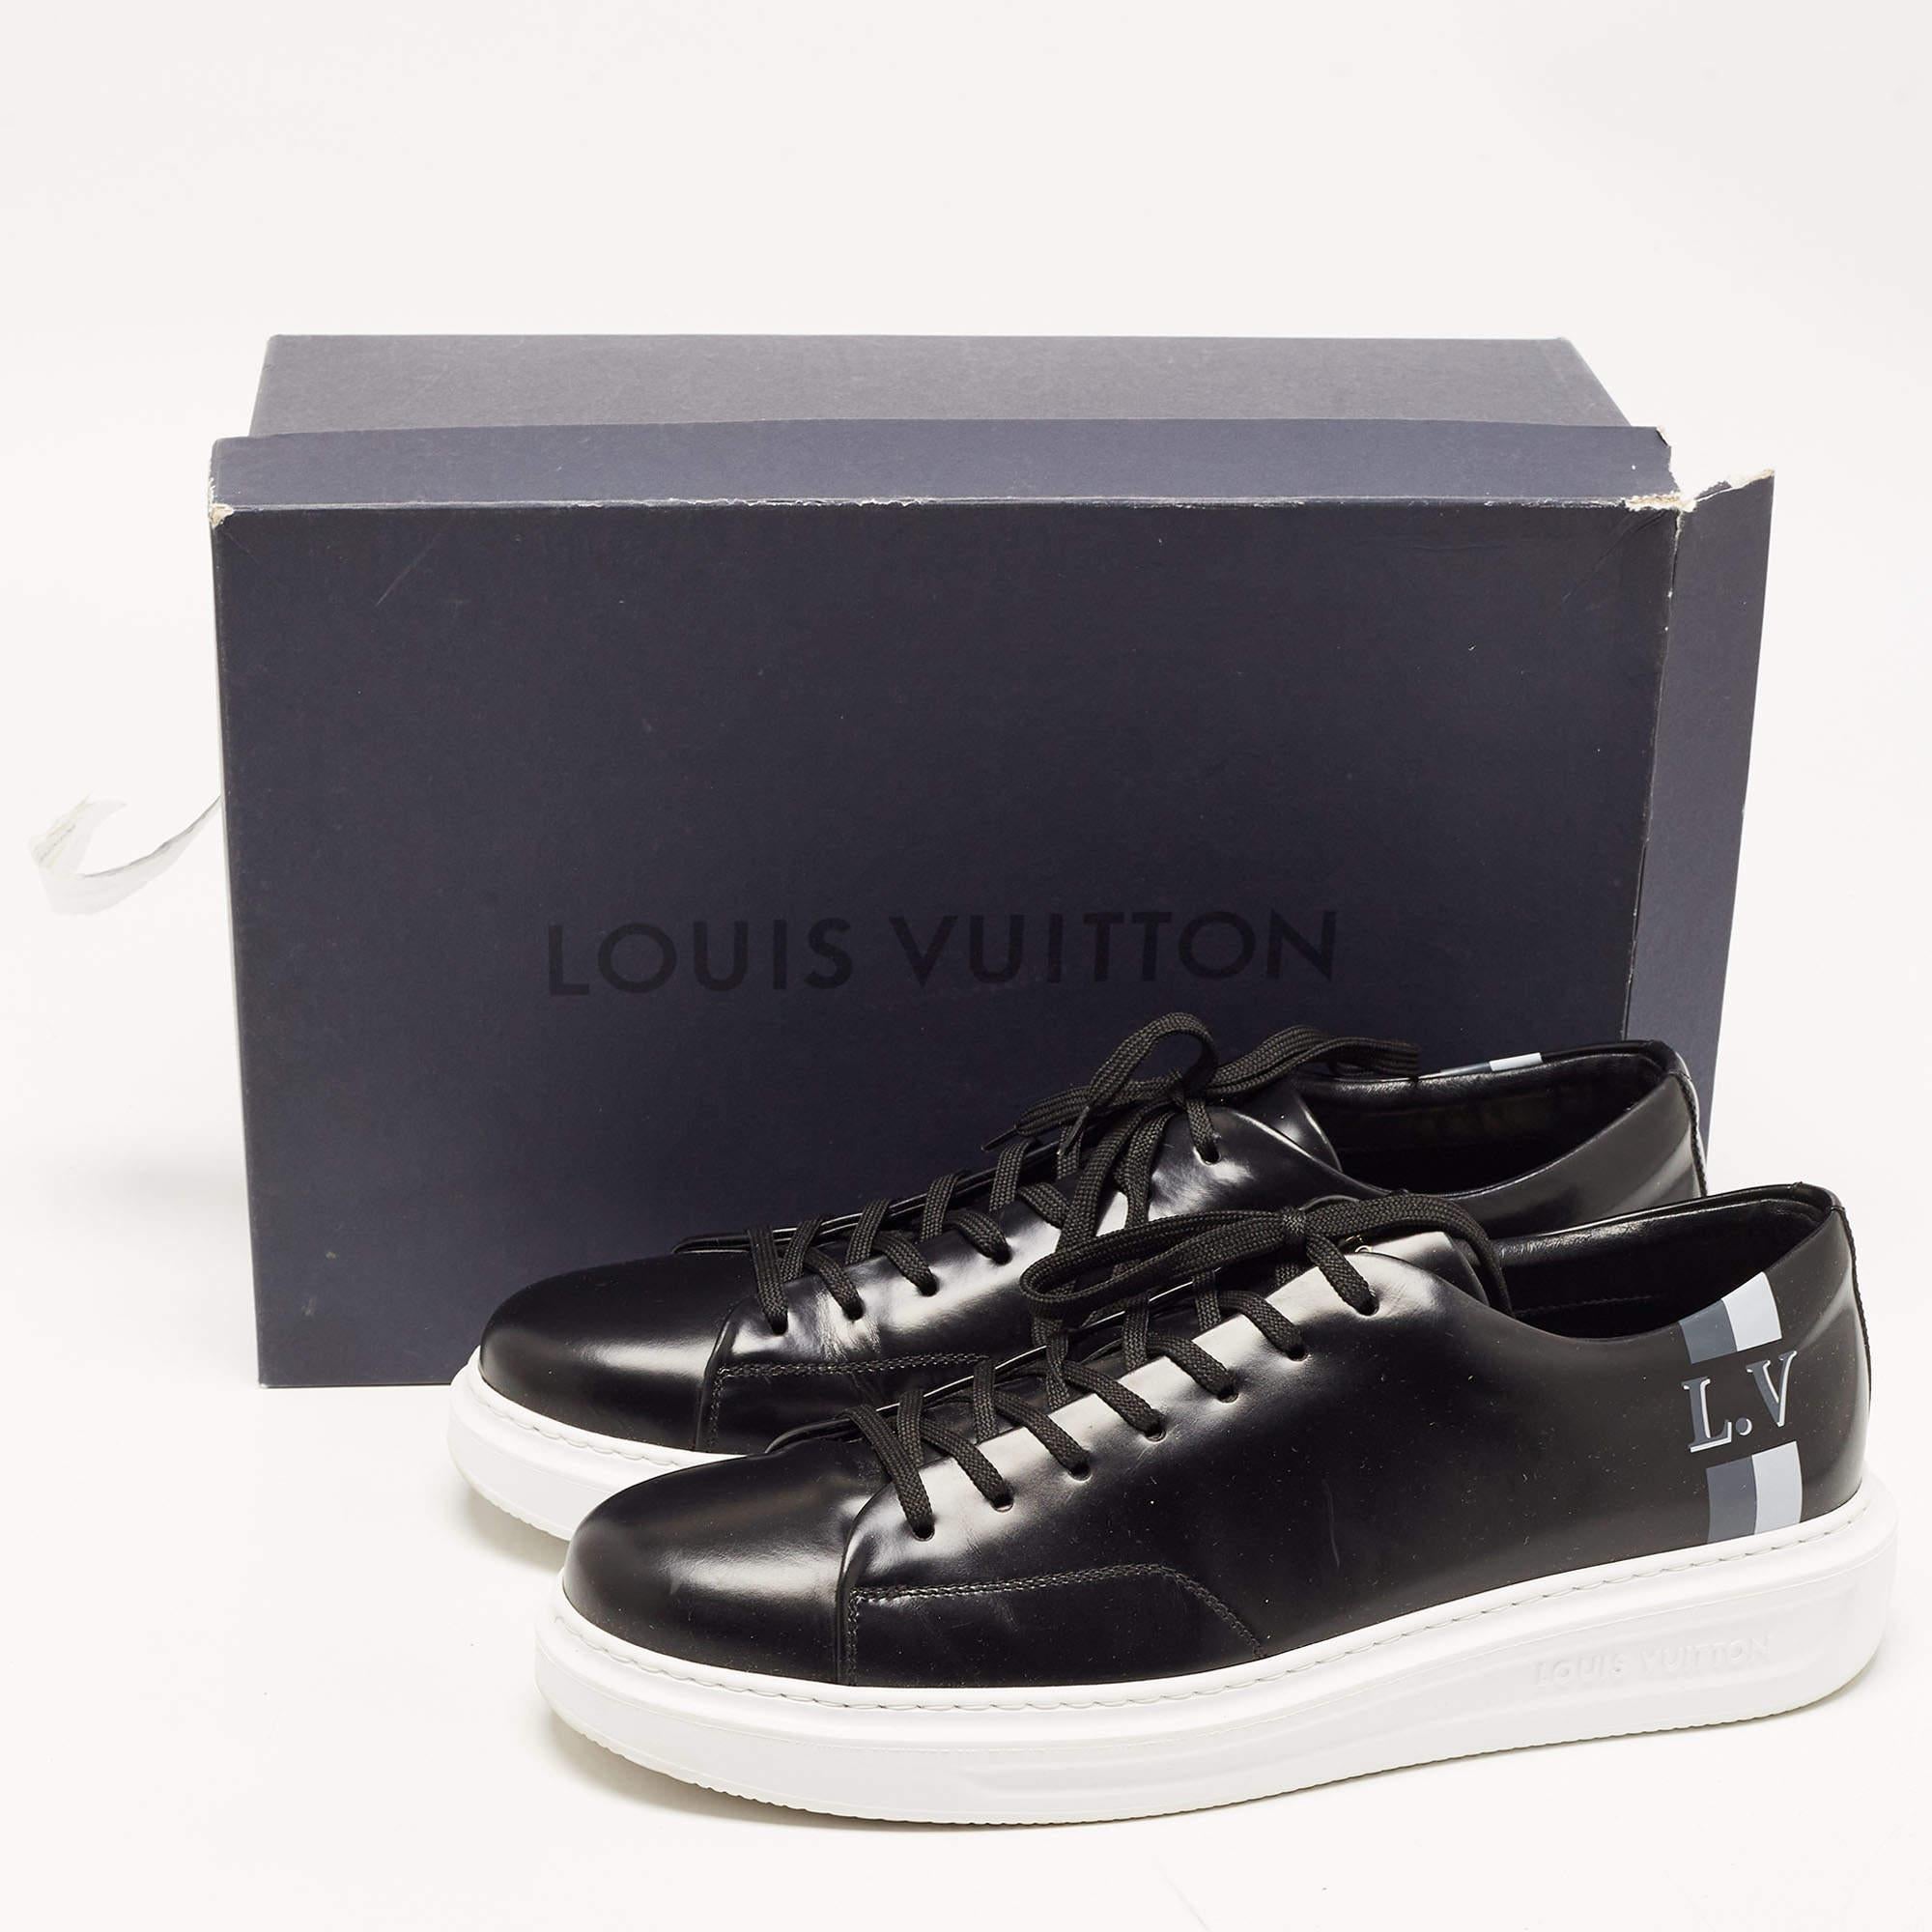 Louis Vuitton Black Leather Beverly Hills Sneakers Size 44 5